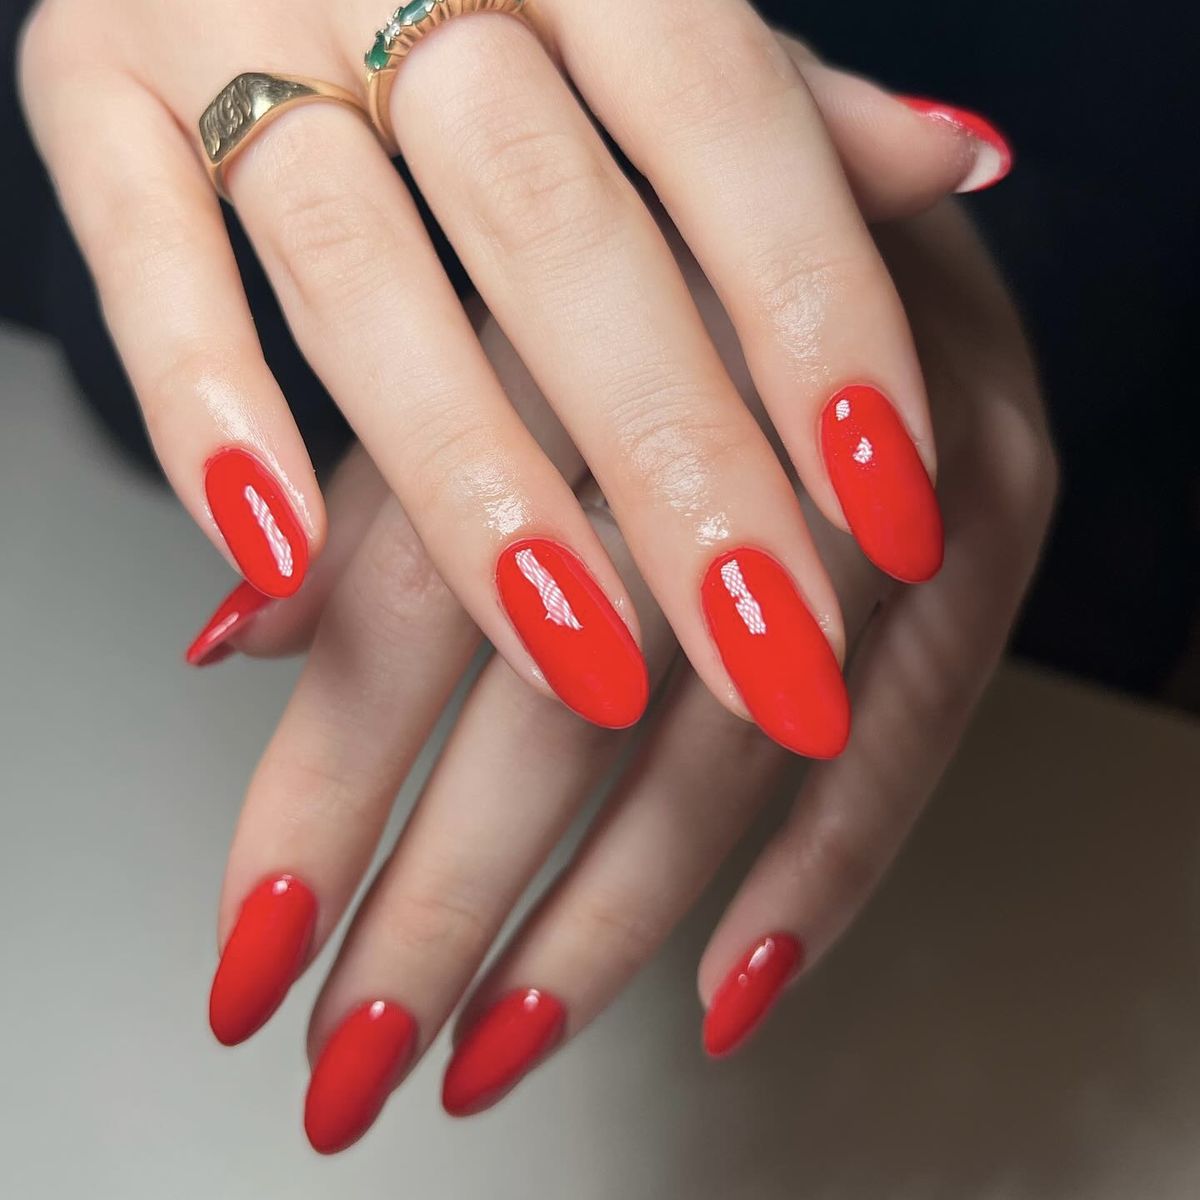 11 anti-trend and expensive nail colours that will never go out of style